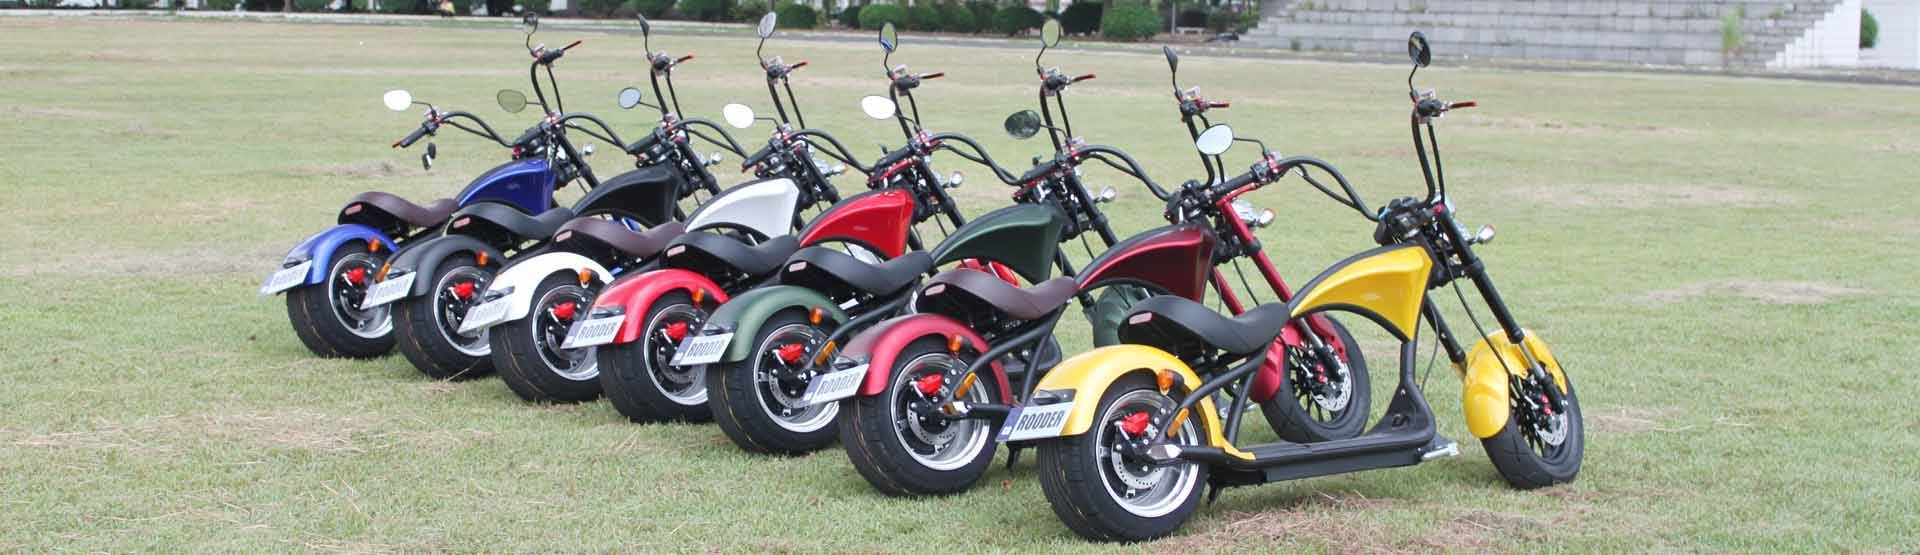 Rooder super m1 citycoco scooter